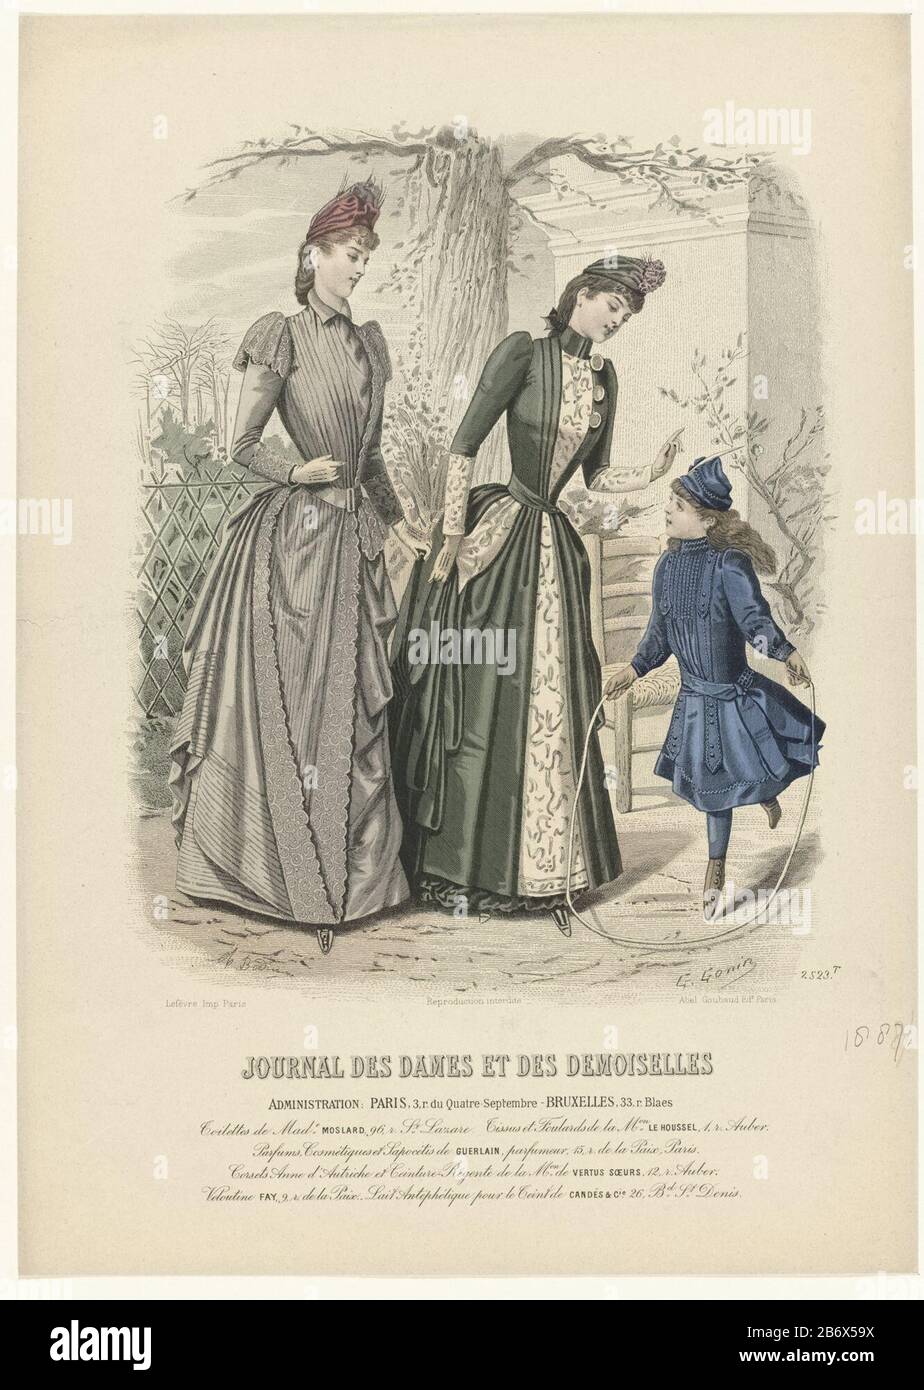 Journal des Dames et des Demoiselles, 1887, No 2523 Toilettes de Made MOSLARD () Two women in high-necked dresses with queue in a park. A girl is skipping. According to the caption, 'toilettes' of Moslard. Here are some rules text advertising for various products. Print out the fashion magazine Journal des Dames et des Demoiselles (1852-1902) . Manufacturer : printmaker A. Bodin (listed building), designed by Guido Gonin (listed building) Publisher: Abel Goubaud (listed building) printer: H. Lefèvre (listed property) Place manufacture: Paris Date: 1887 Physical features: engra, hand-colored ma Stock Photo